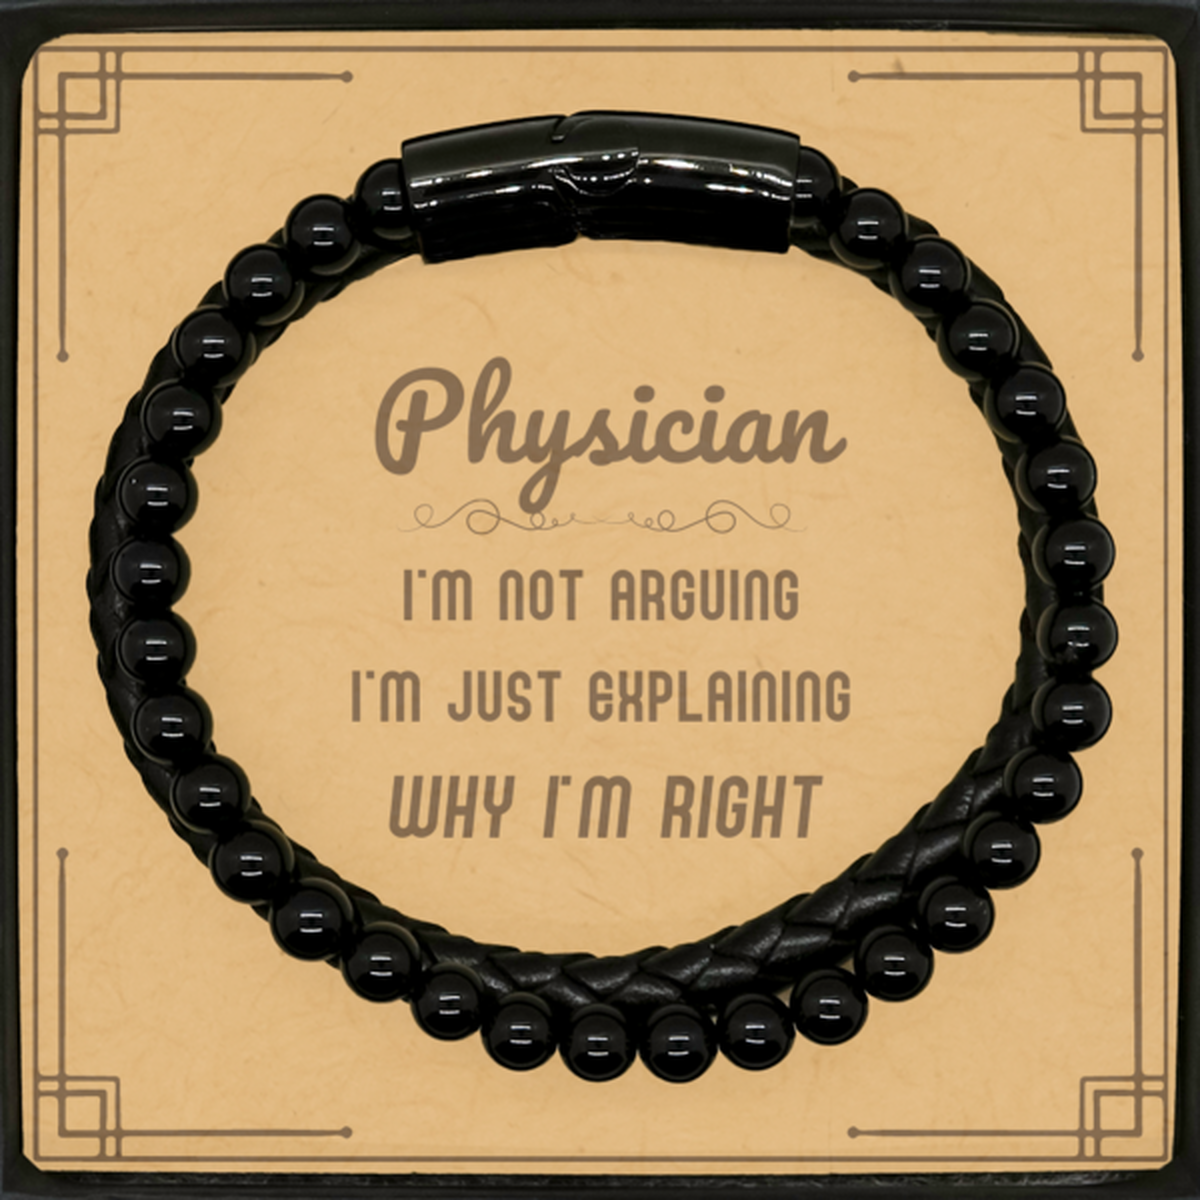 Physician I'm not Arguing. I'm Just Explaining Why I'm RIGHT Stone Leather Bracelets, Funny Saying Quote Physician Gifts For Physician Message Card Graduation Birthday Christmas Gifts for Men Women Coworker